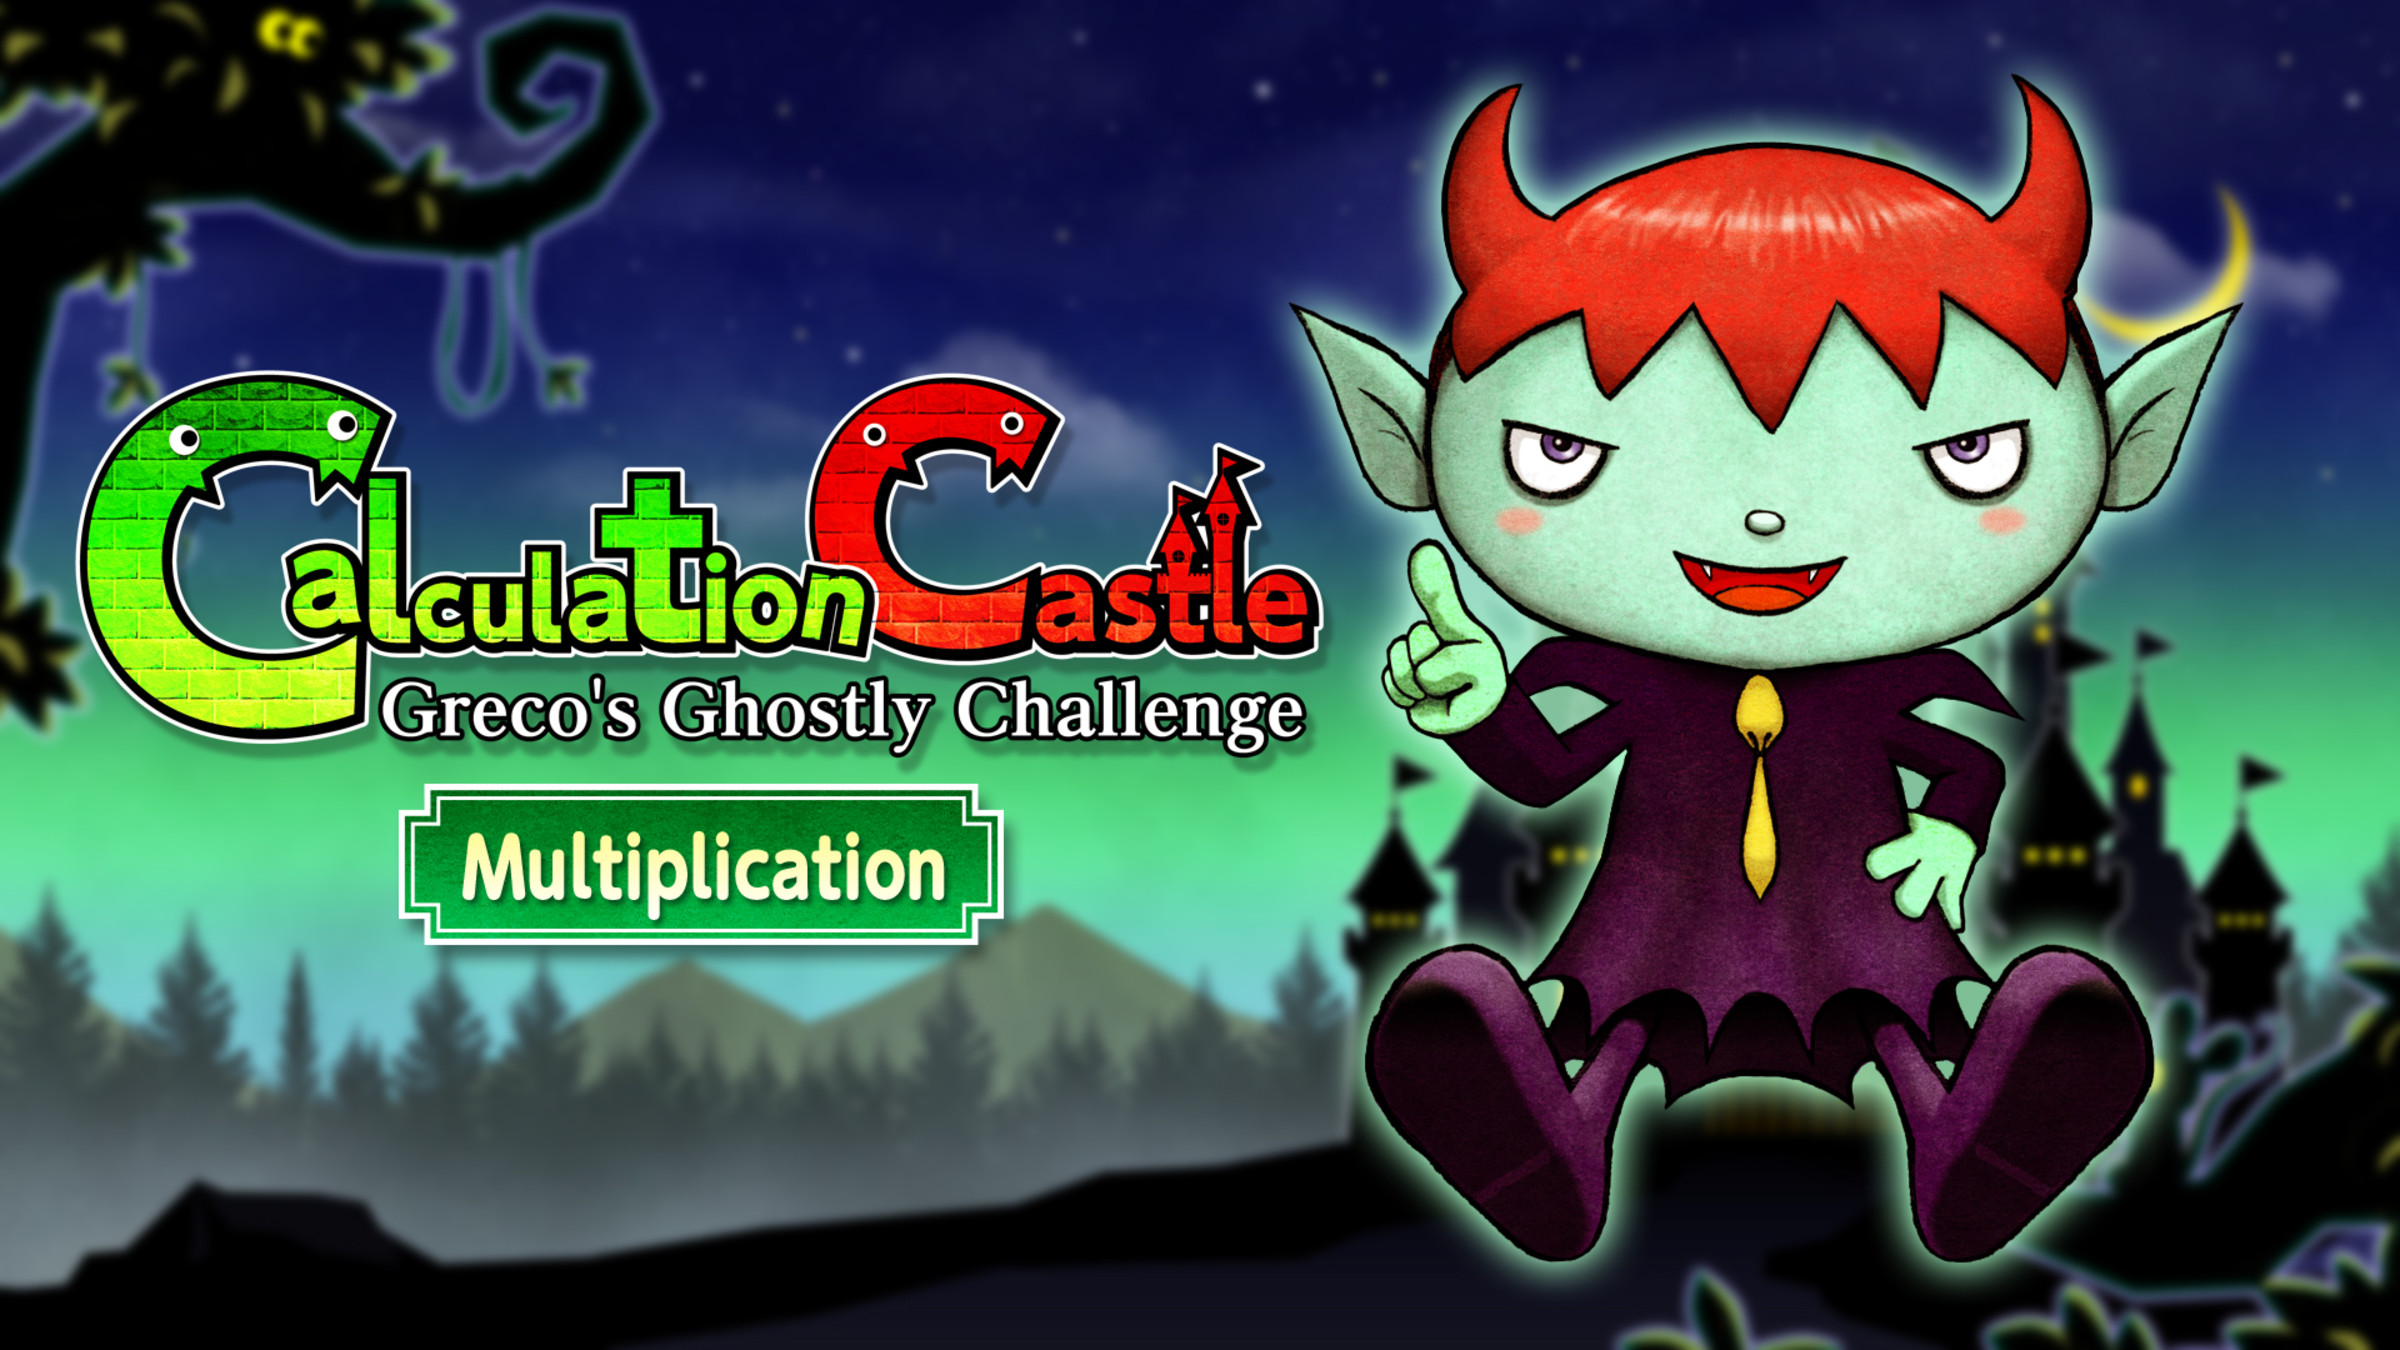 Halvtreds champignon knap Calculation Castle : Greco's Ghostly Challenge "Multiplication " for Nintendo  Switch - Nintendo Official Site